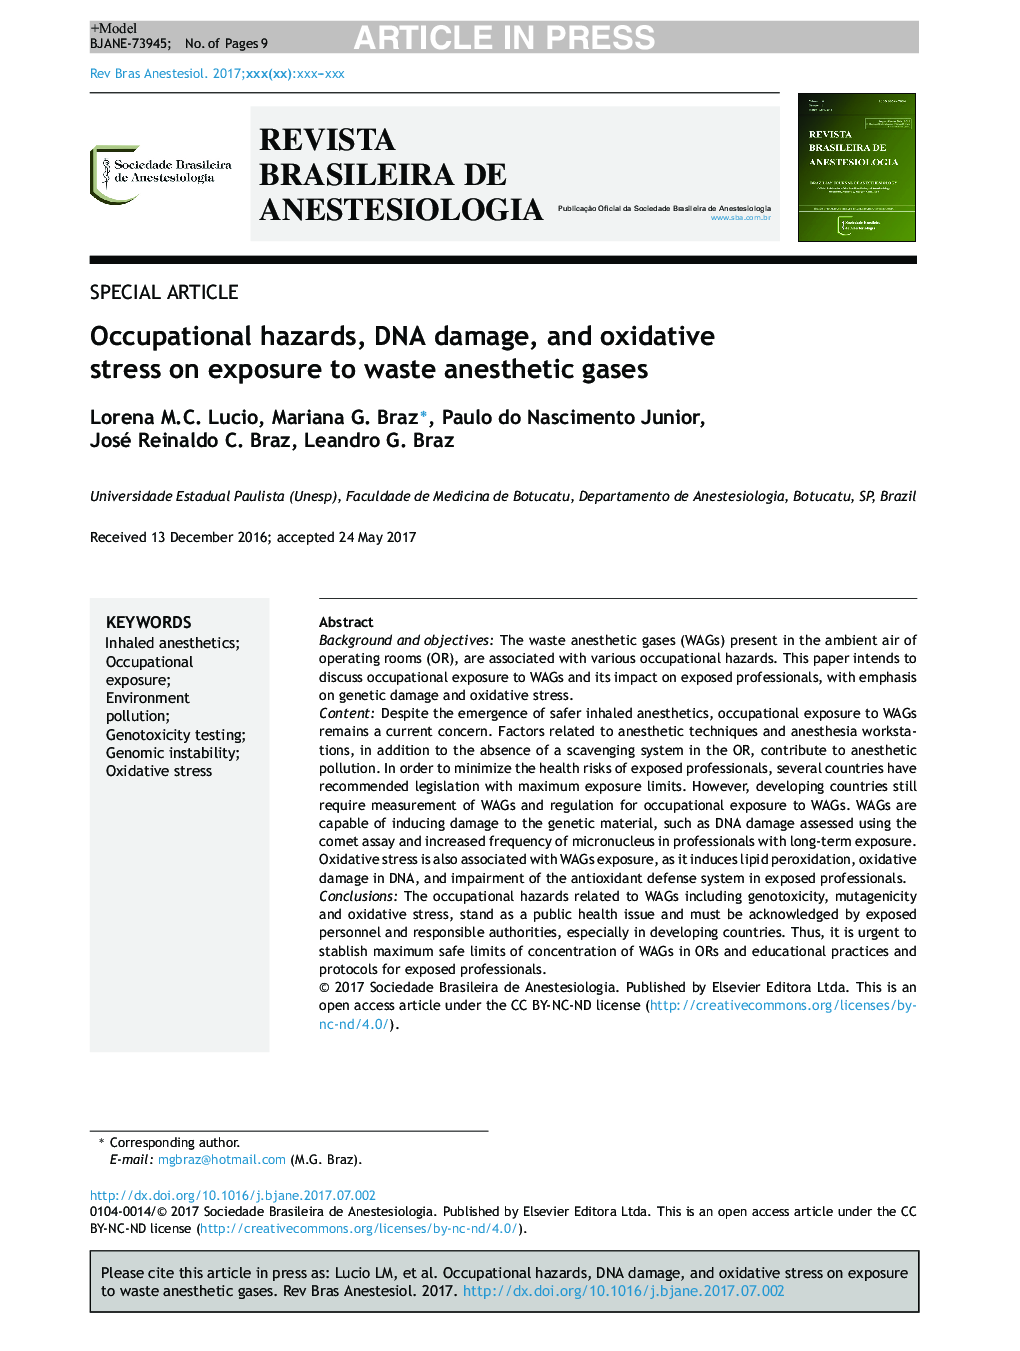 Occupational hazards, DNA damage, and oxidative stress on exposure to waste anesthetic gases